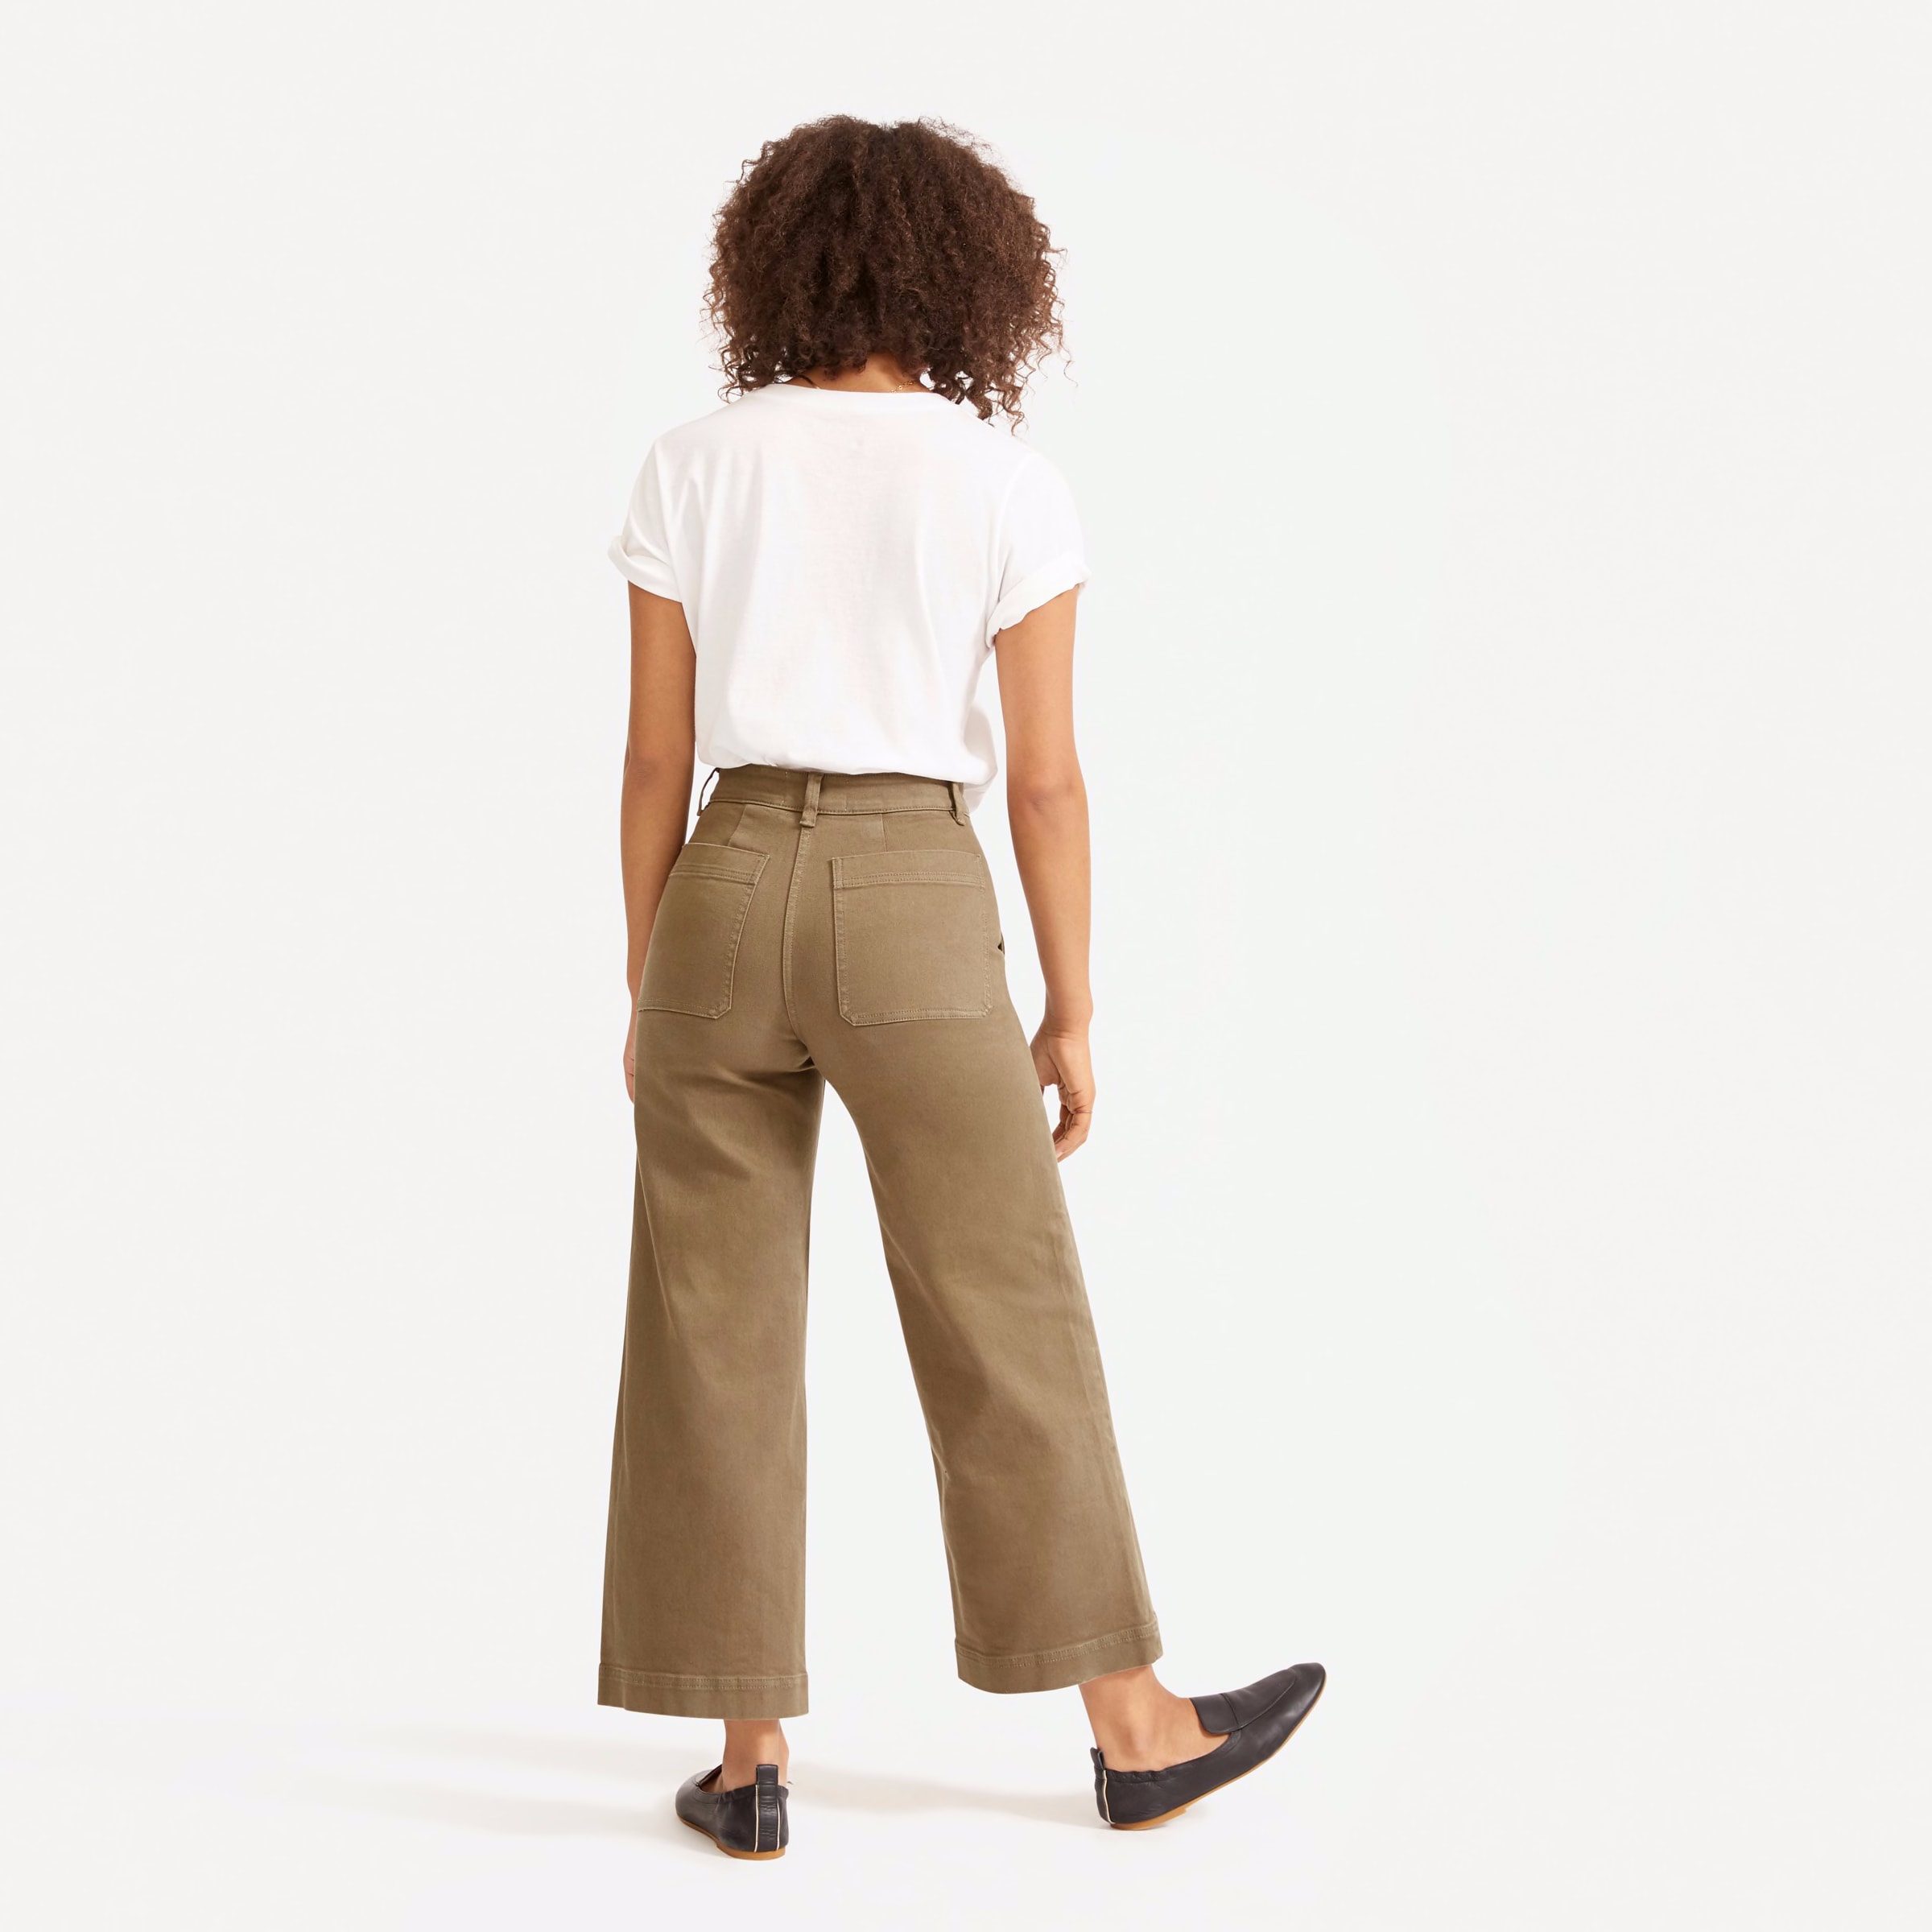 The Wide Leg Crop Pant Hotsell, 58% OFF | www.rupit.com